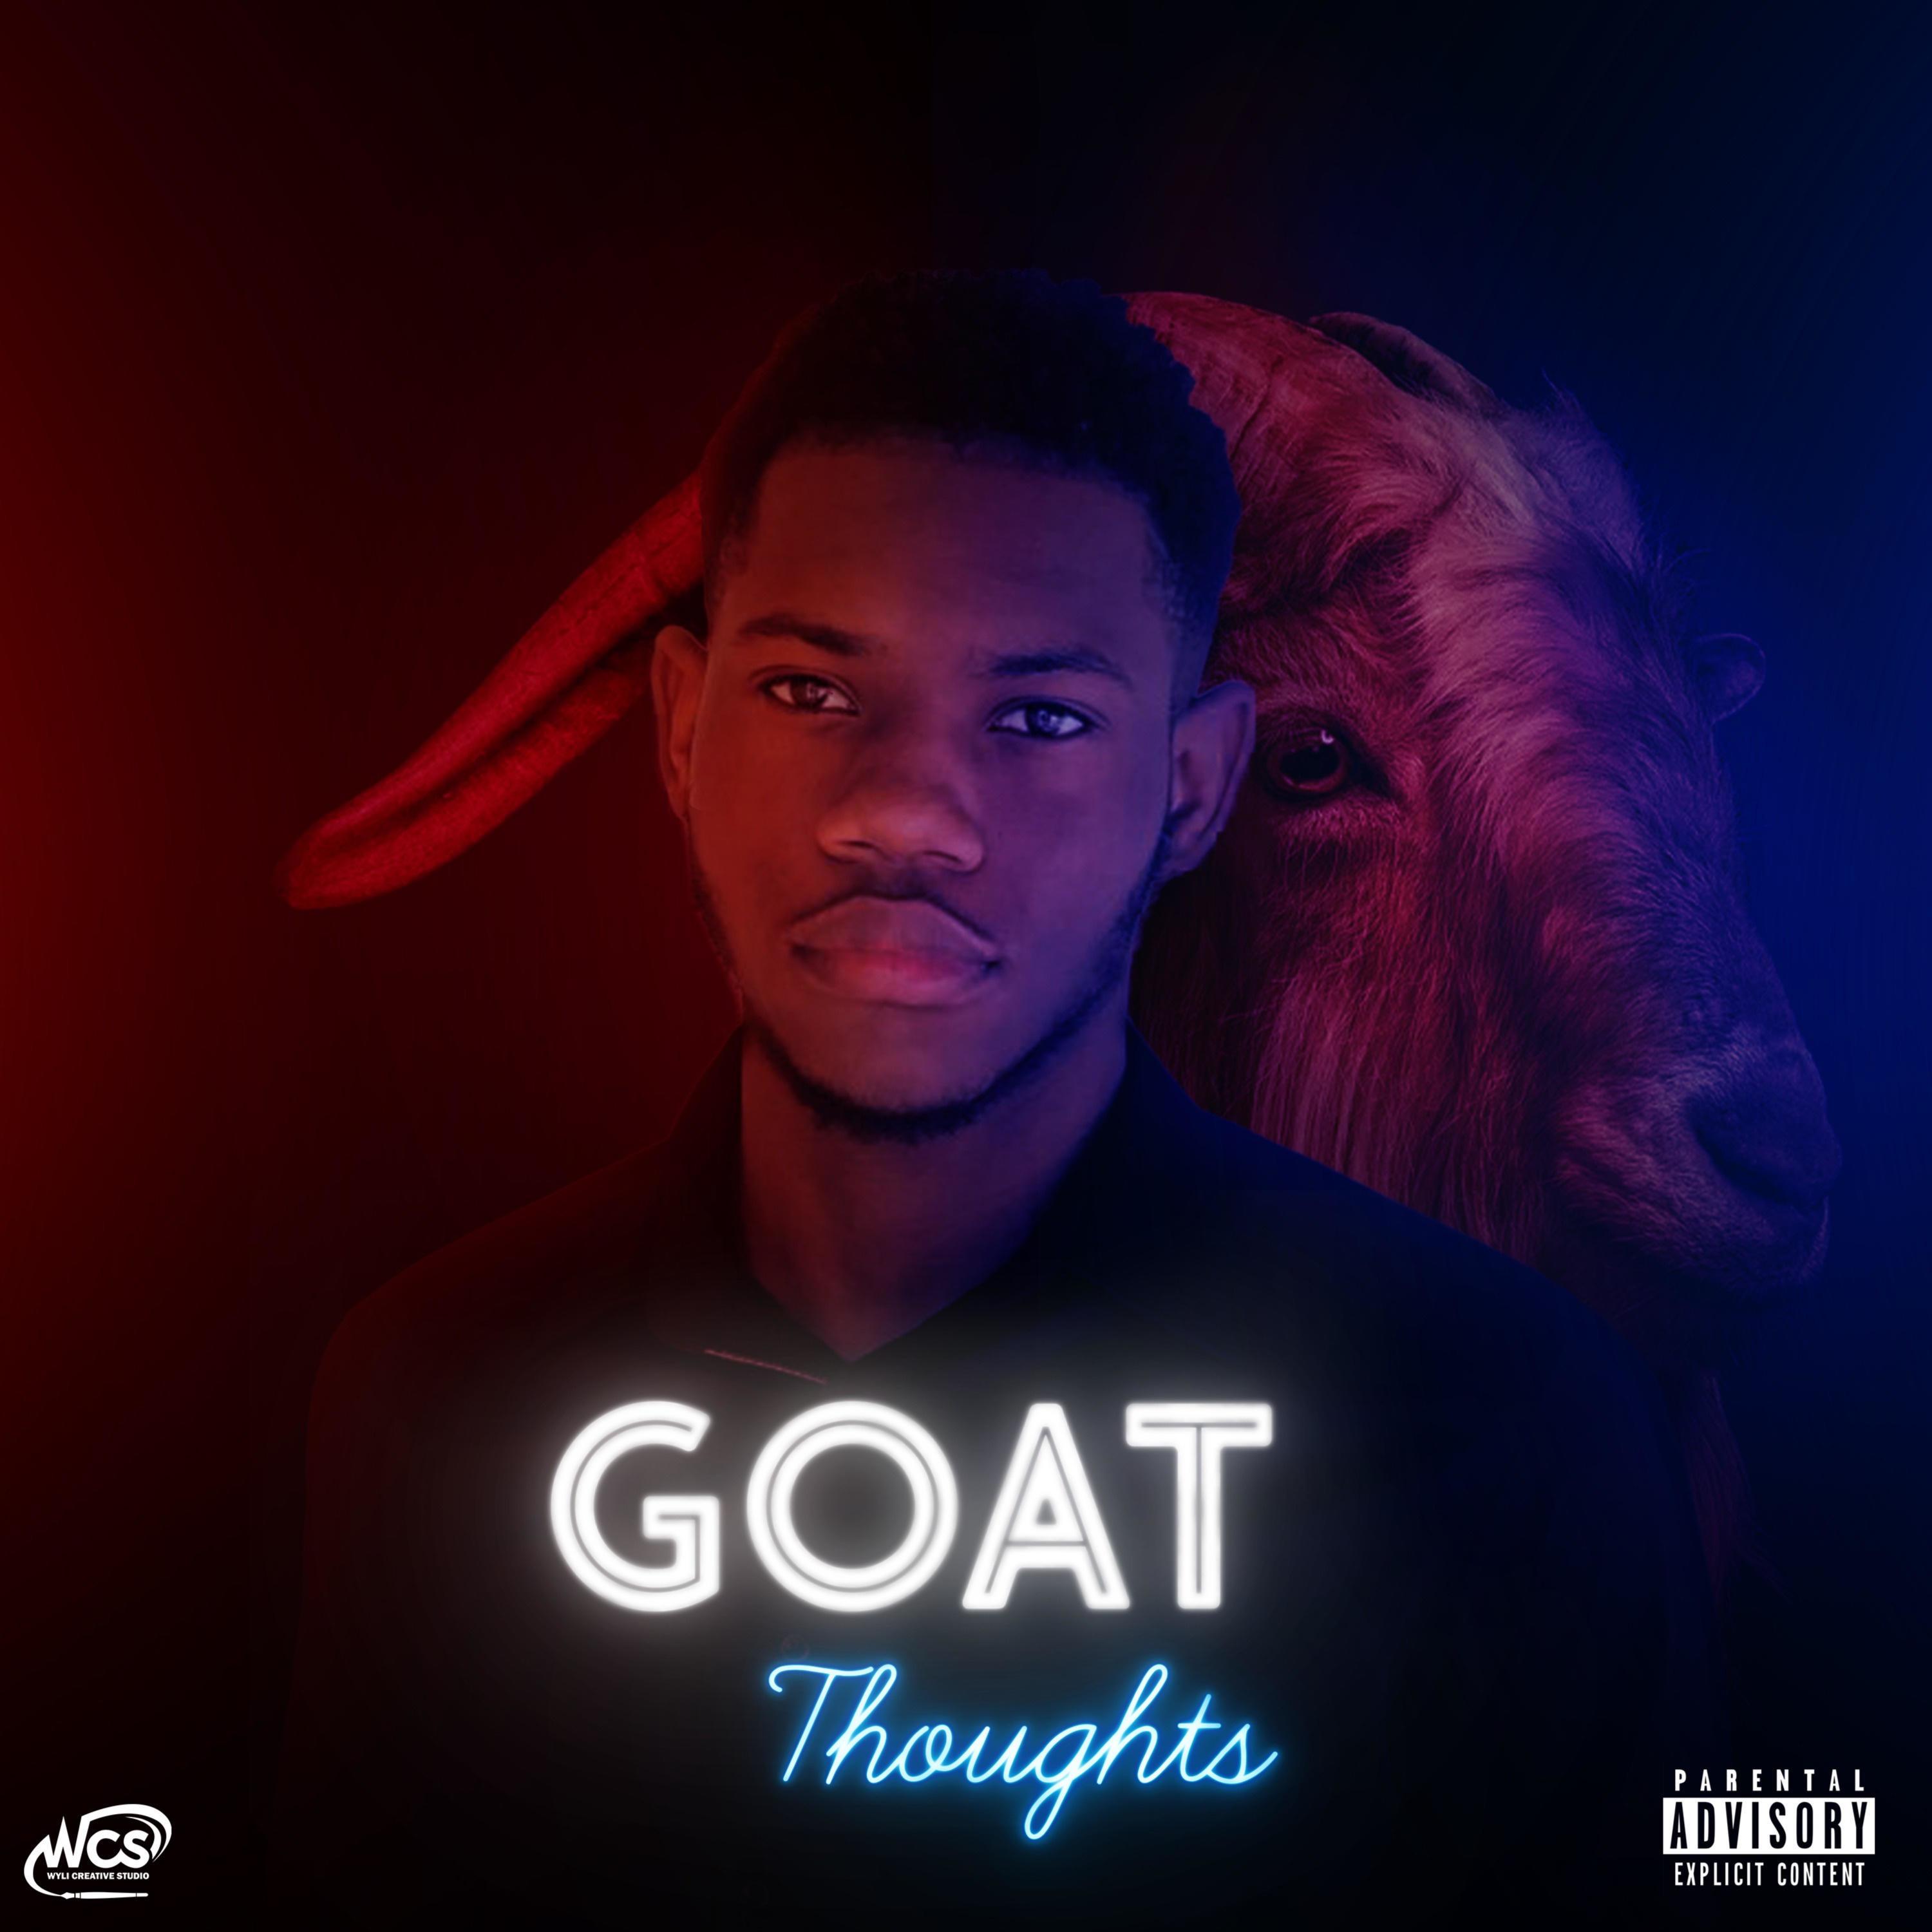 Goat Thoughts